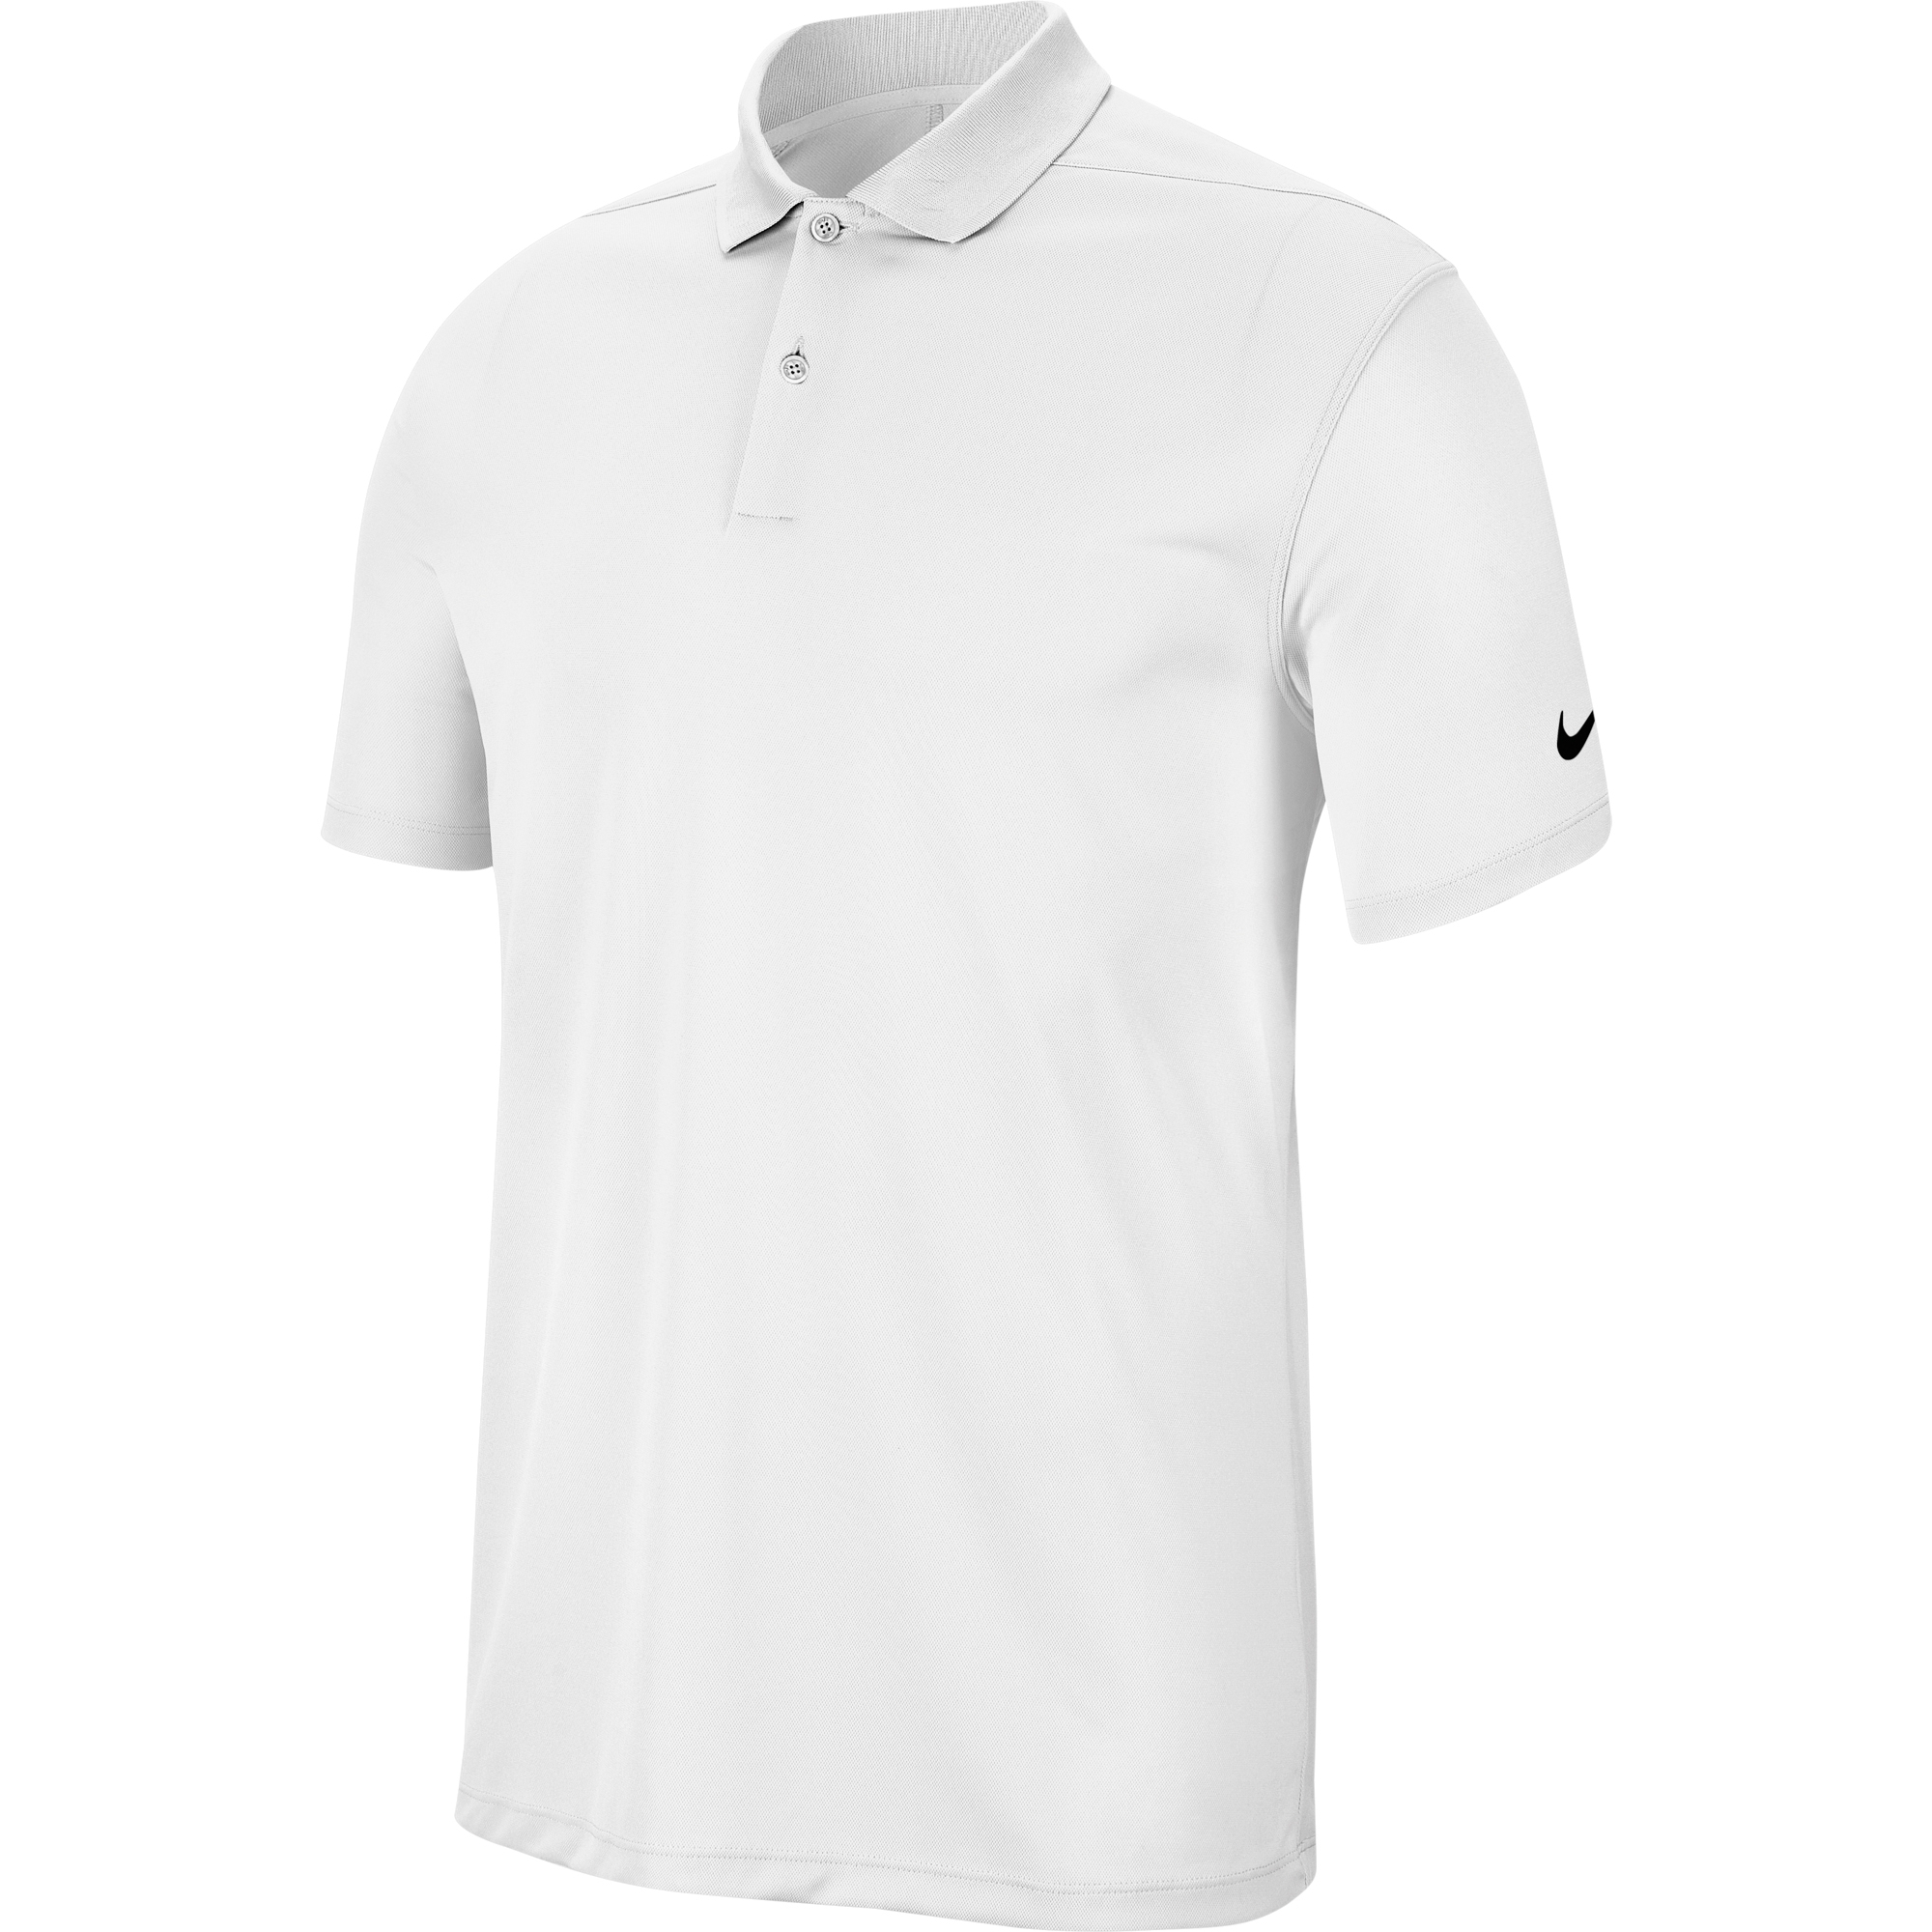 Nike Mens Dry Fit Solid Victory Golf Polo Shirt Xl- Chest 44-48.5